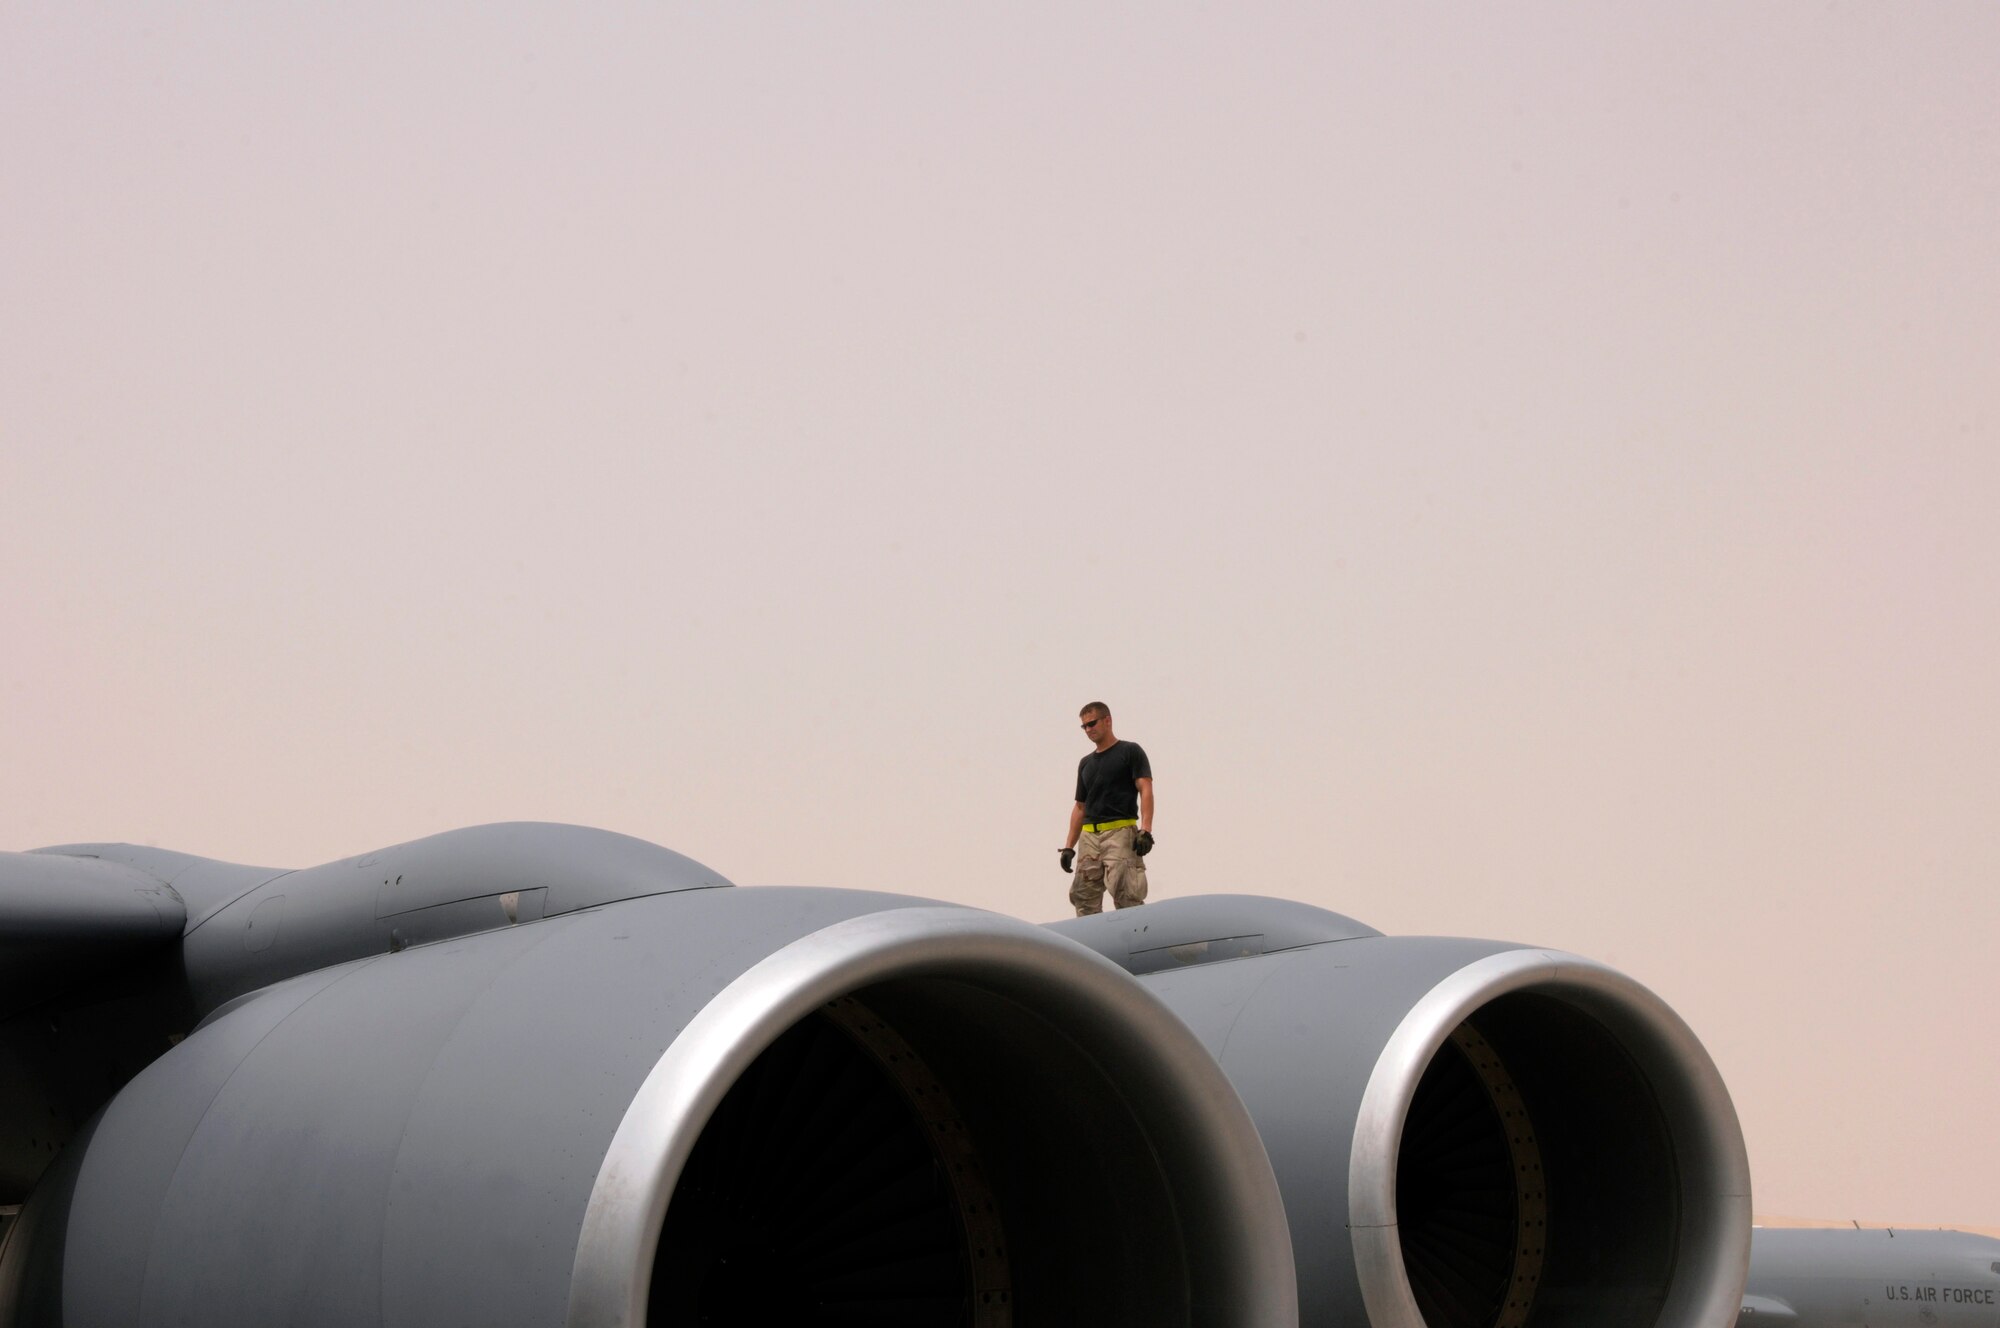 Tech. Sgt. Jim Erickson, a crew chief with the 340th Expeditionary Aircraft Maintenance Squadron from Grand Forks Air Force Base, N.D., walks the wing of a KC-135 as part of a post-flight maintenance inspection Aug. 3, 2008, at an undisclosed location in Southwest Asia.  Sergeant Erickson checks for any maintenance issues that need to be addressed before the aircraft can fly its next mission. The 340th refuels all types of bombers, fighters and other support aircraft engaged in Operations Iraqi Freedom, Enduring Freedom and Combined Joint Task Force Horn of Africa.  (U.S. Air Force photo by Tech. Sgt. Michael Boquette/Released)